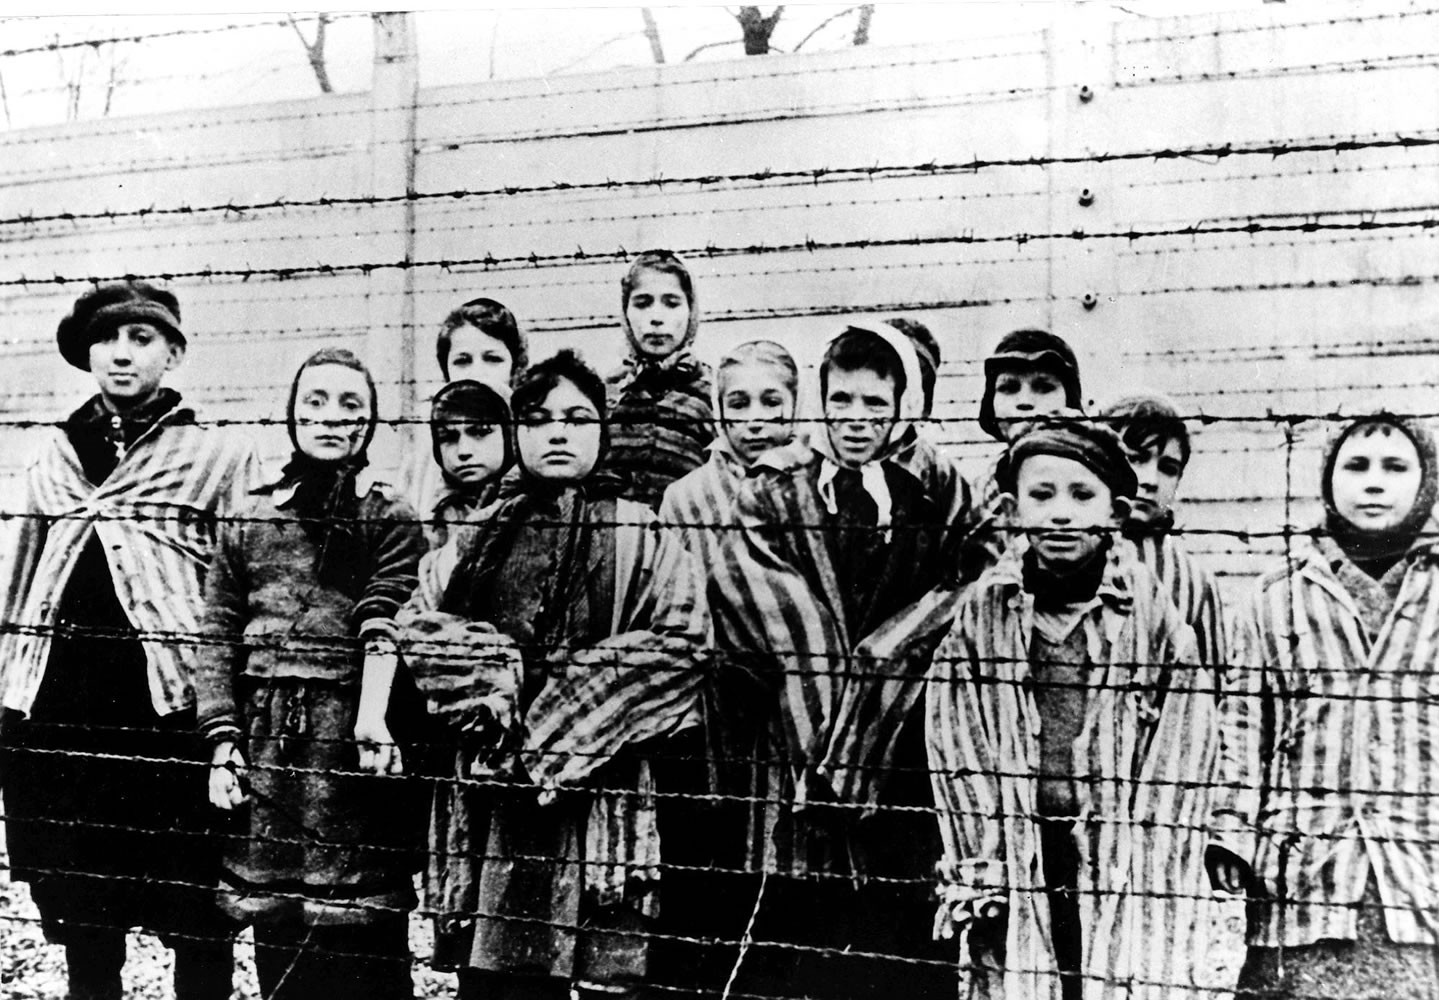 A picture taken just after the liberation by the Soviet army in January 1945 shows a group of children wearing concentration camp uniforms behind barbed wire fence in the Auschwitz concentration camp.